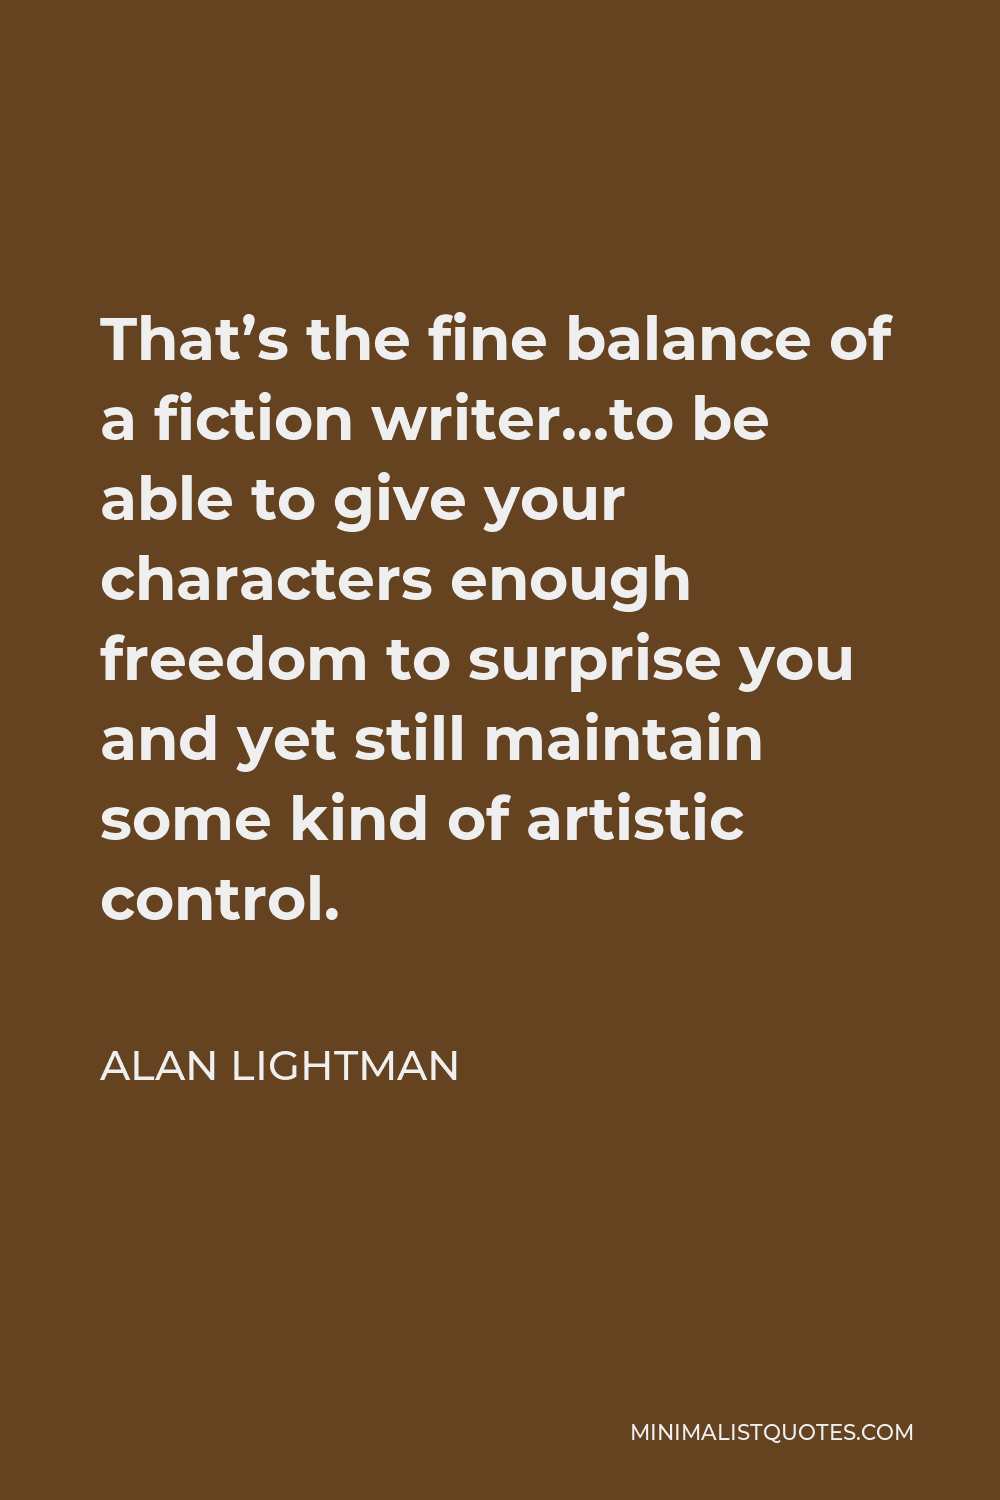 Alan Lightman Quote - That’s the fine balance of a fiction writer…to be able to give your characters enough freedom to surprise you and yet still maintain some kind of artistic control.